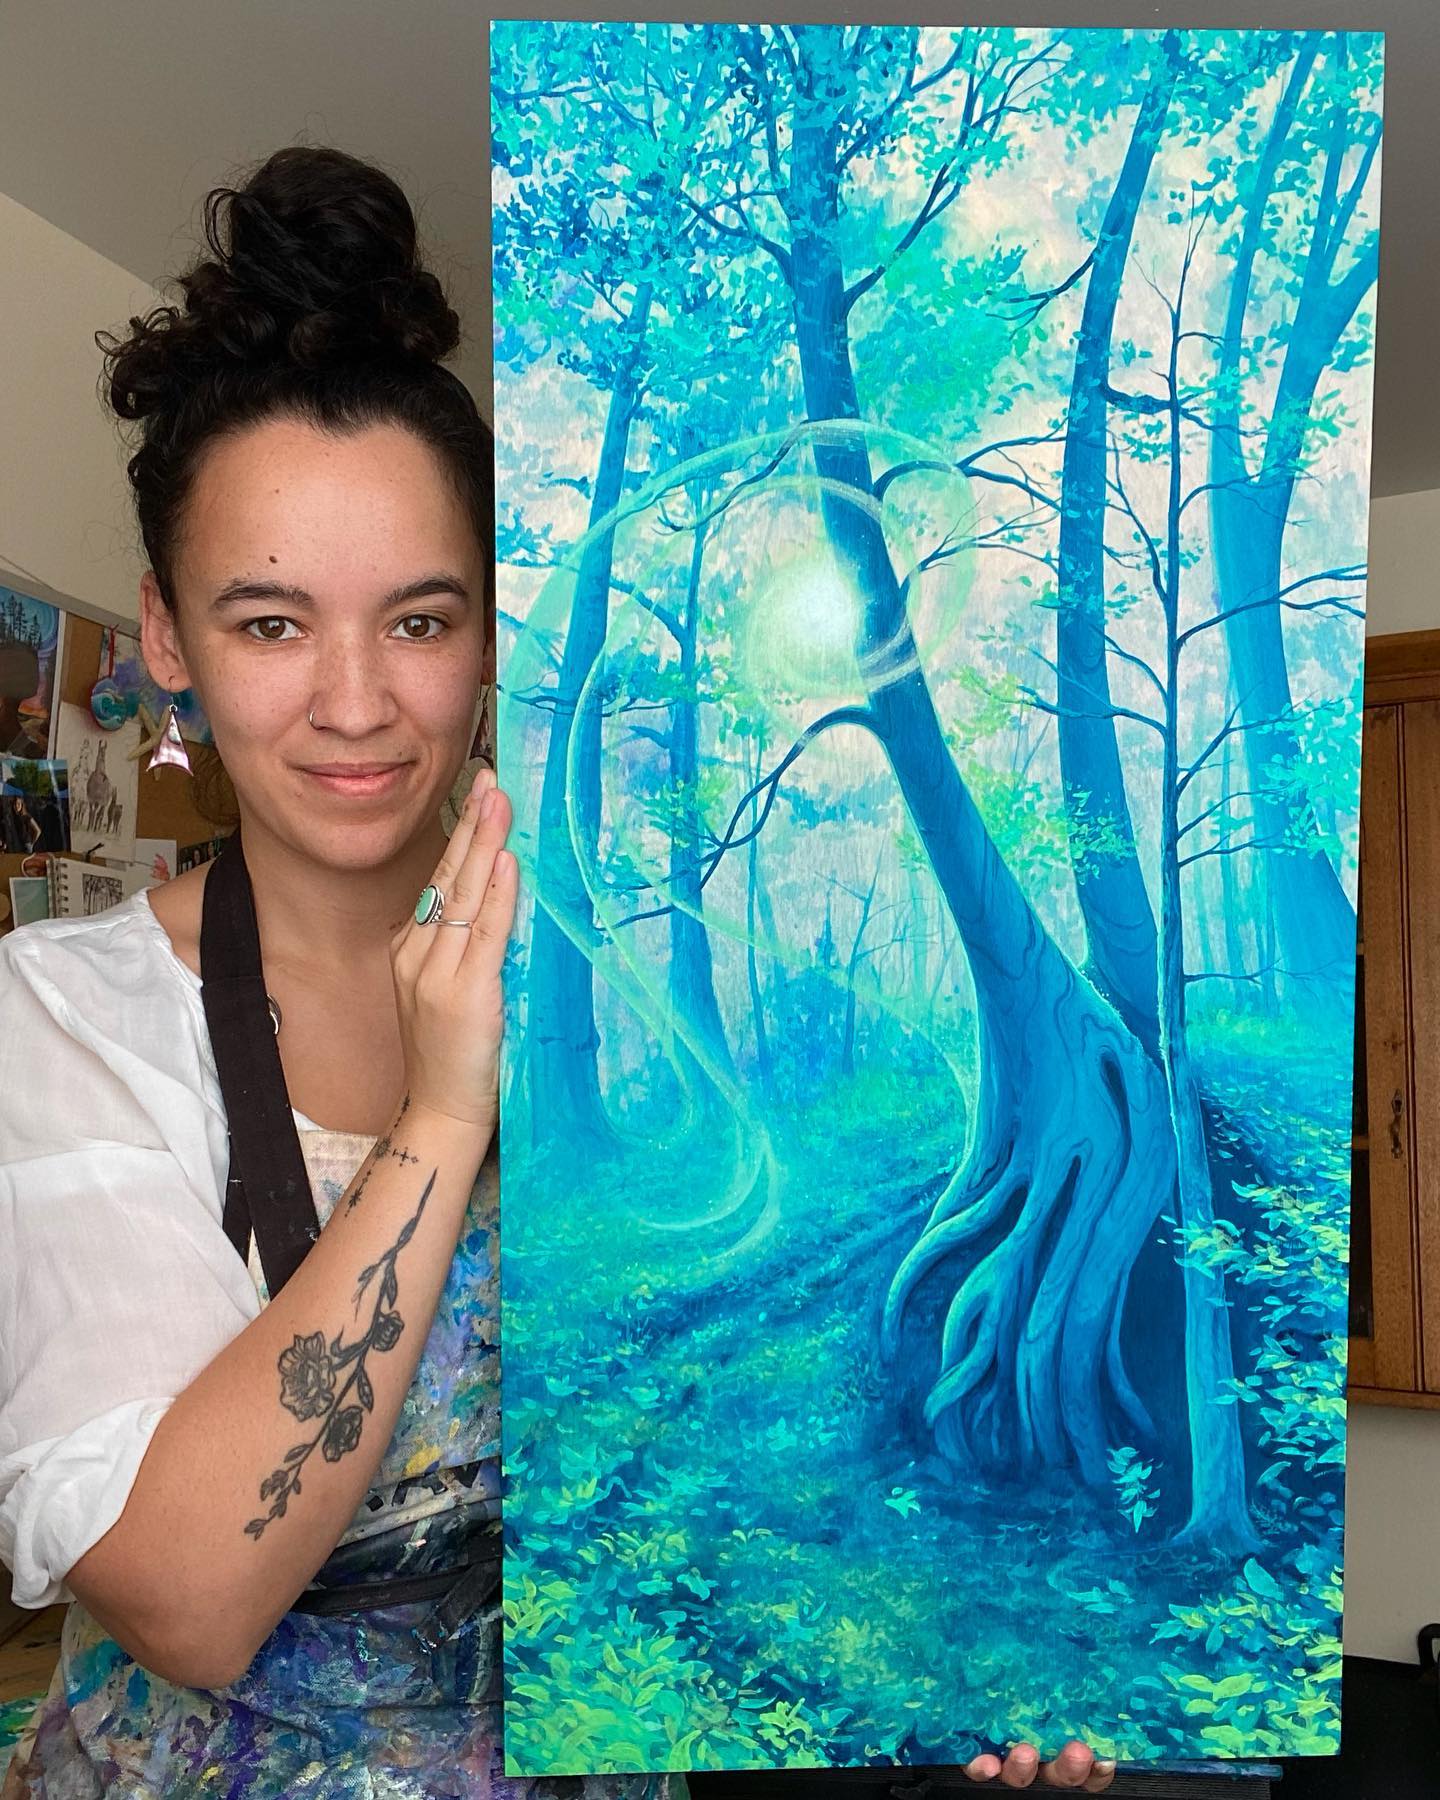 Penny Heather holding a painting titled "Reminiscence". It shows a forest with sun behind the trees, painted in blue and aqua tones in a dreamlike effect.